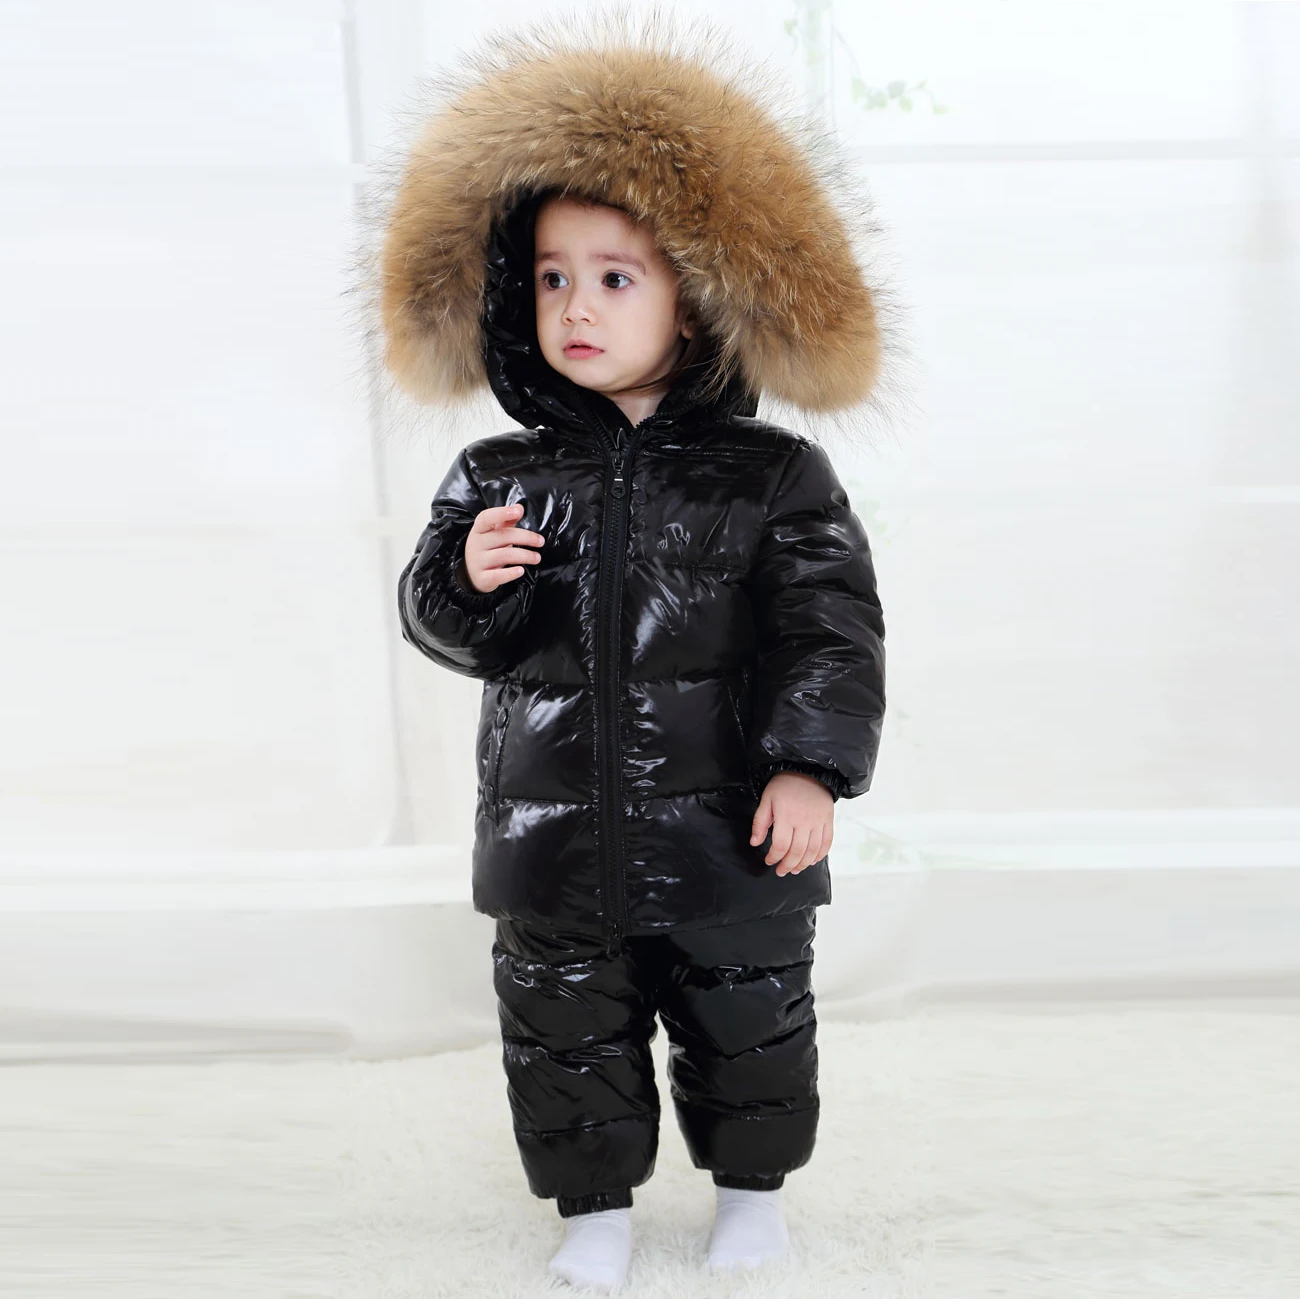 

2022 New Children's Clothing Set Russia Winter Thicken Snowsuit 2-6y Boys 90% White Duck Down Clothes Girls Winter Outfit Jacket